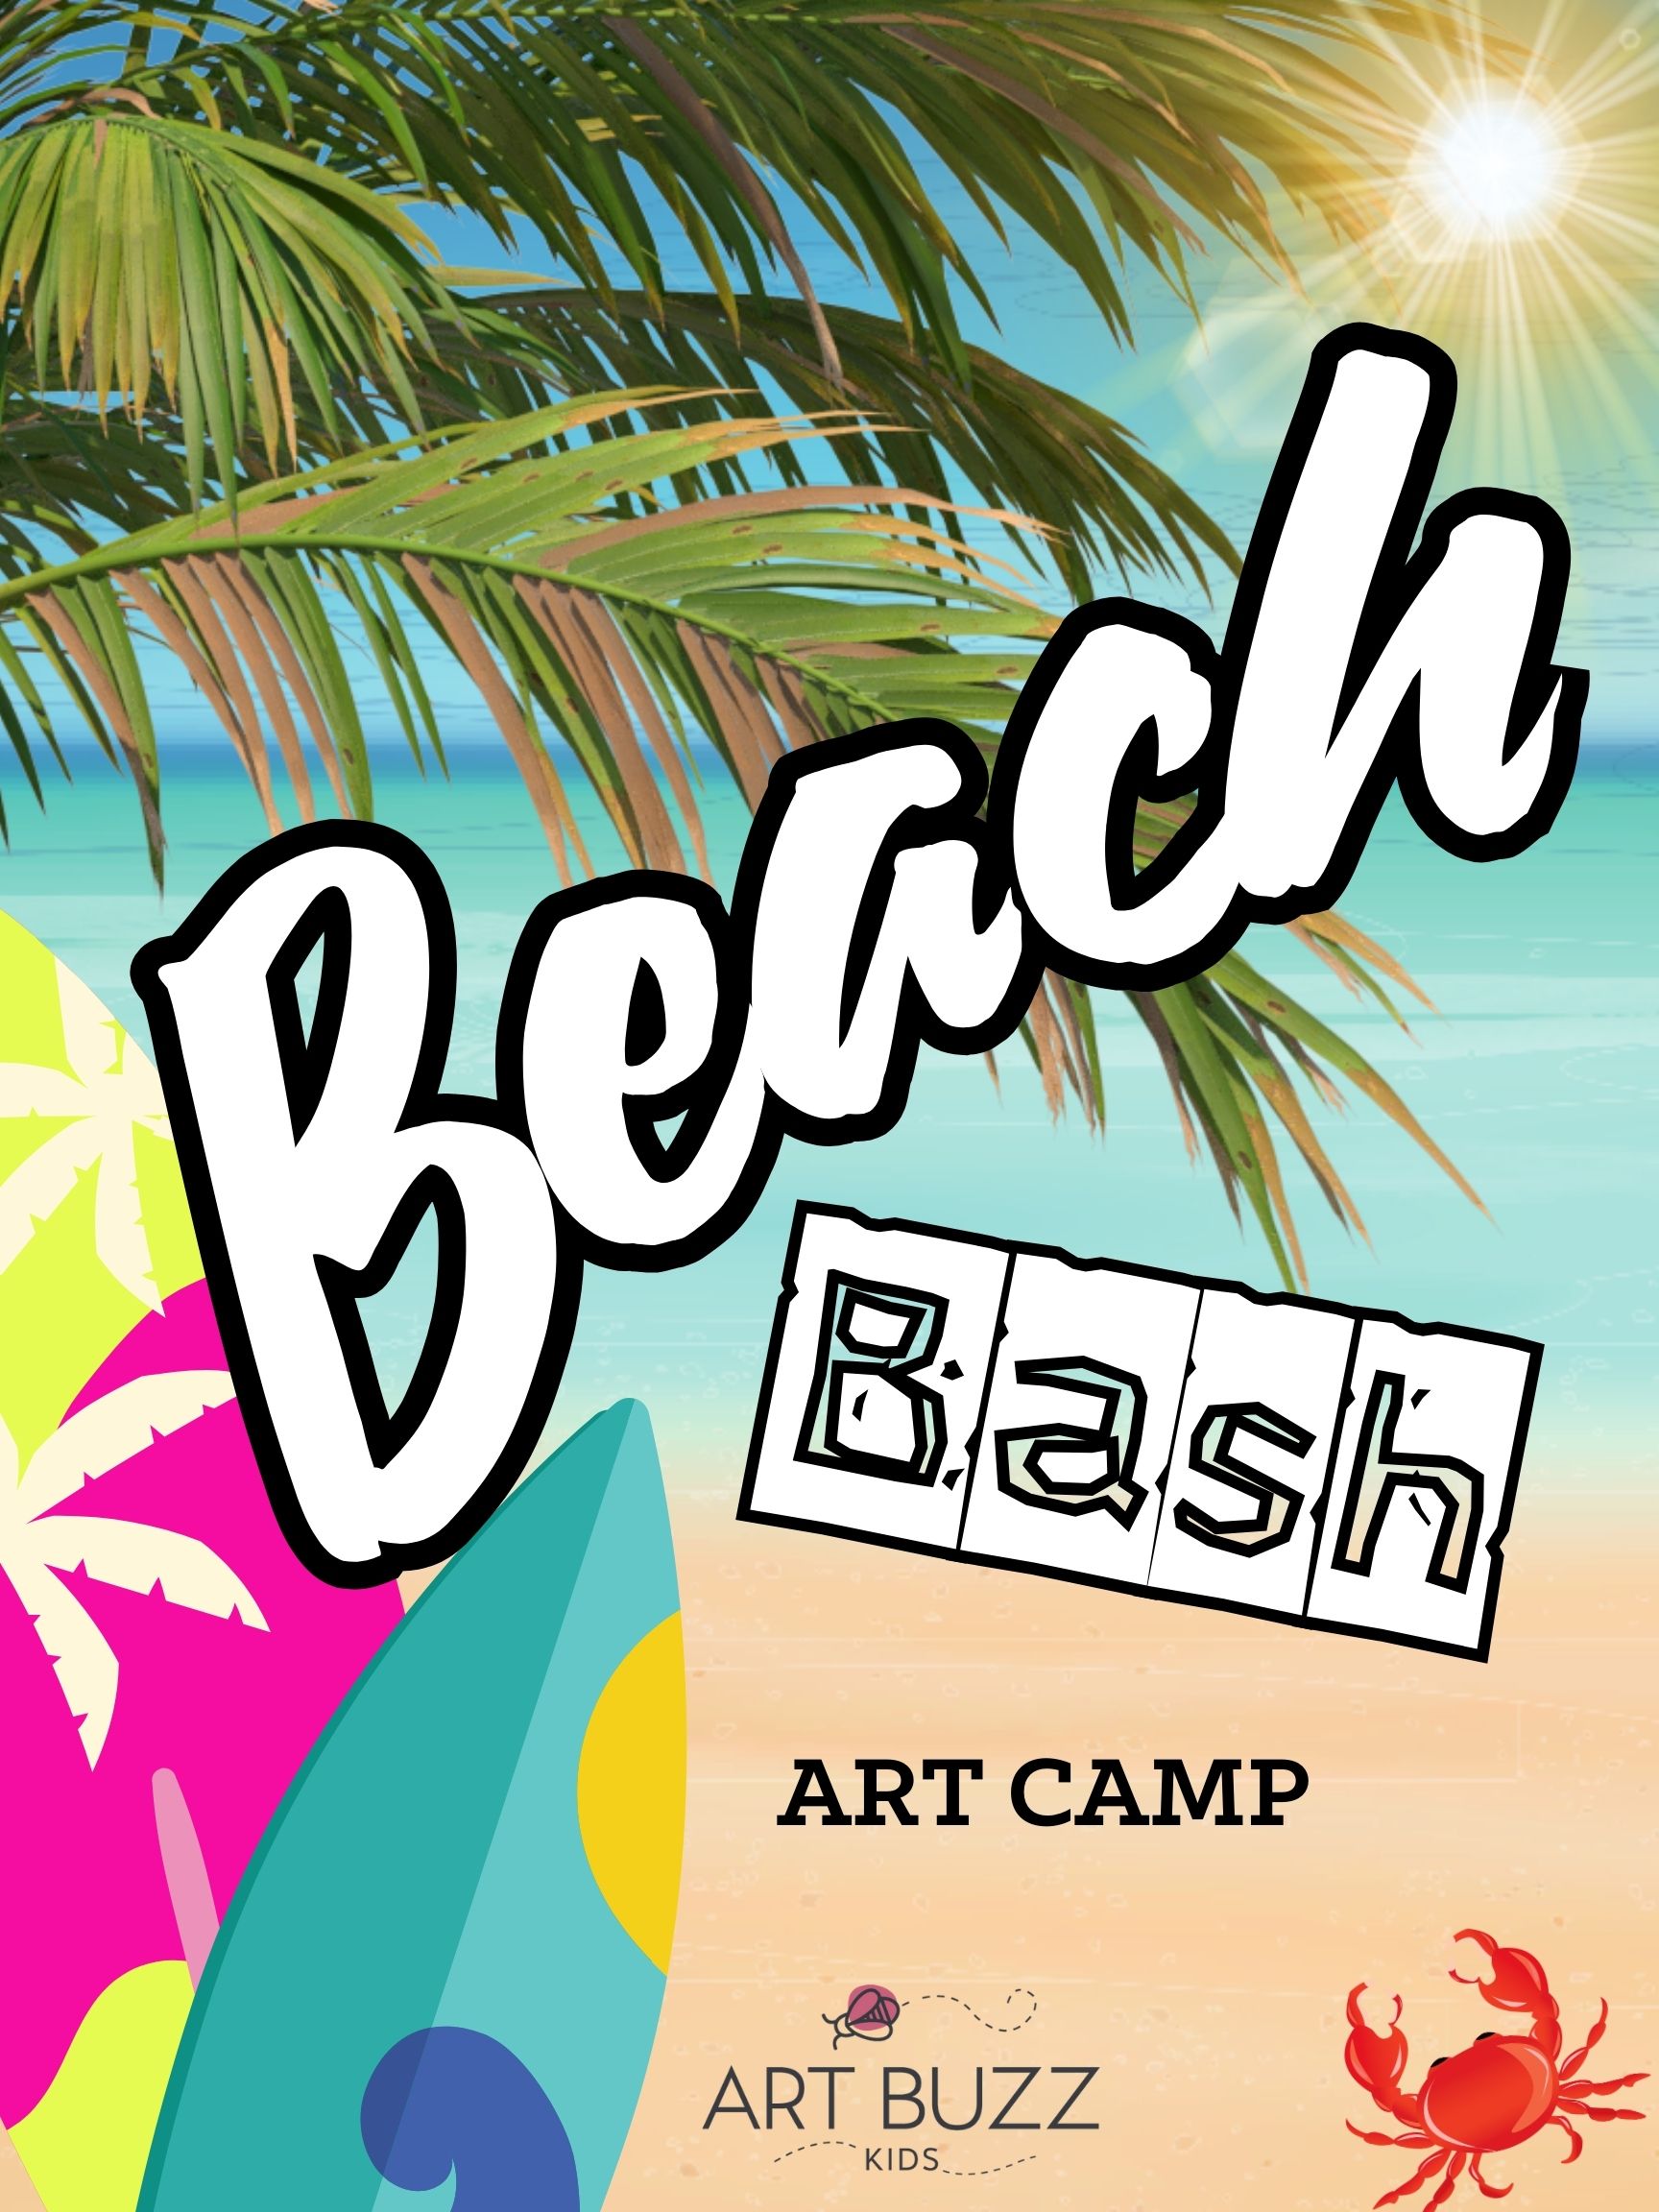 DISCOVER Your Way Through Our Beach Bash! ABK Summer Kids Art Camp! All Ages Welcome!